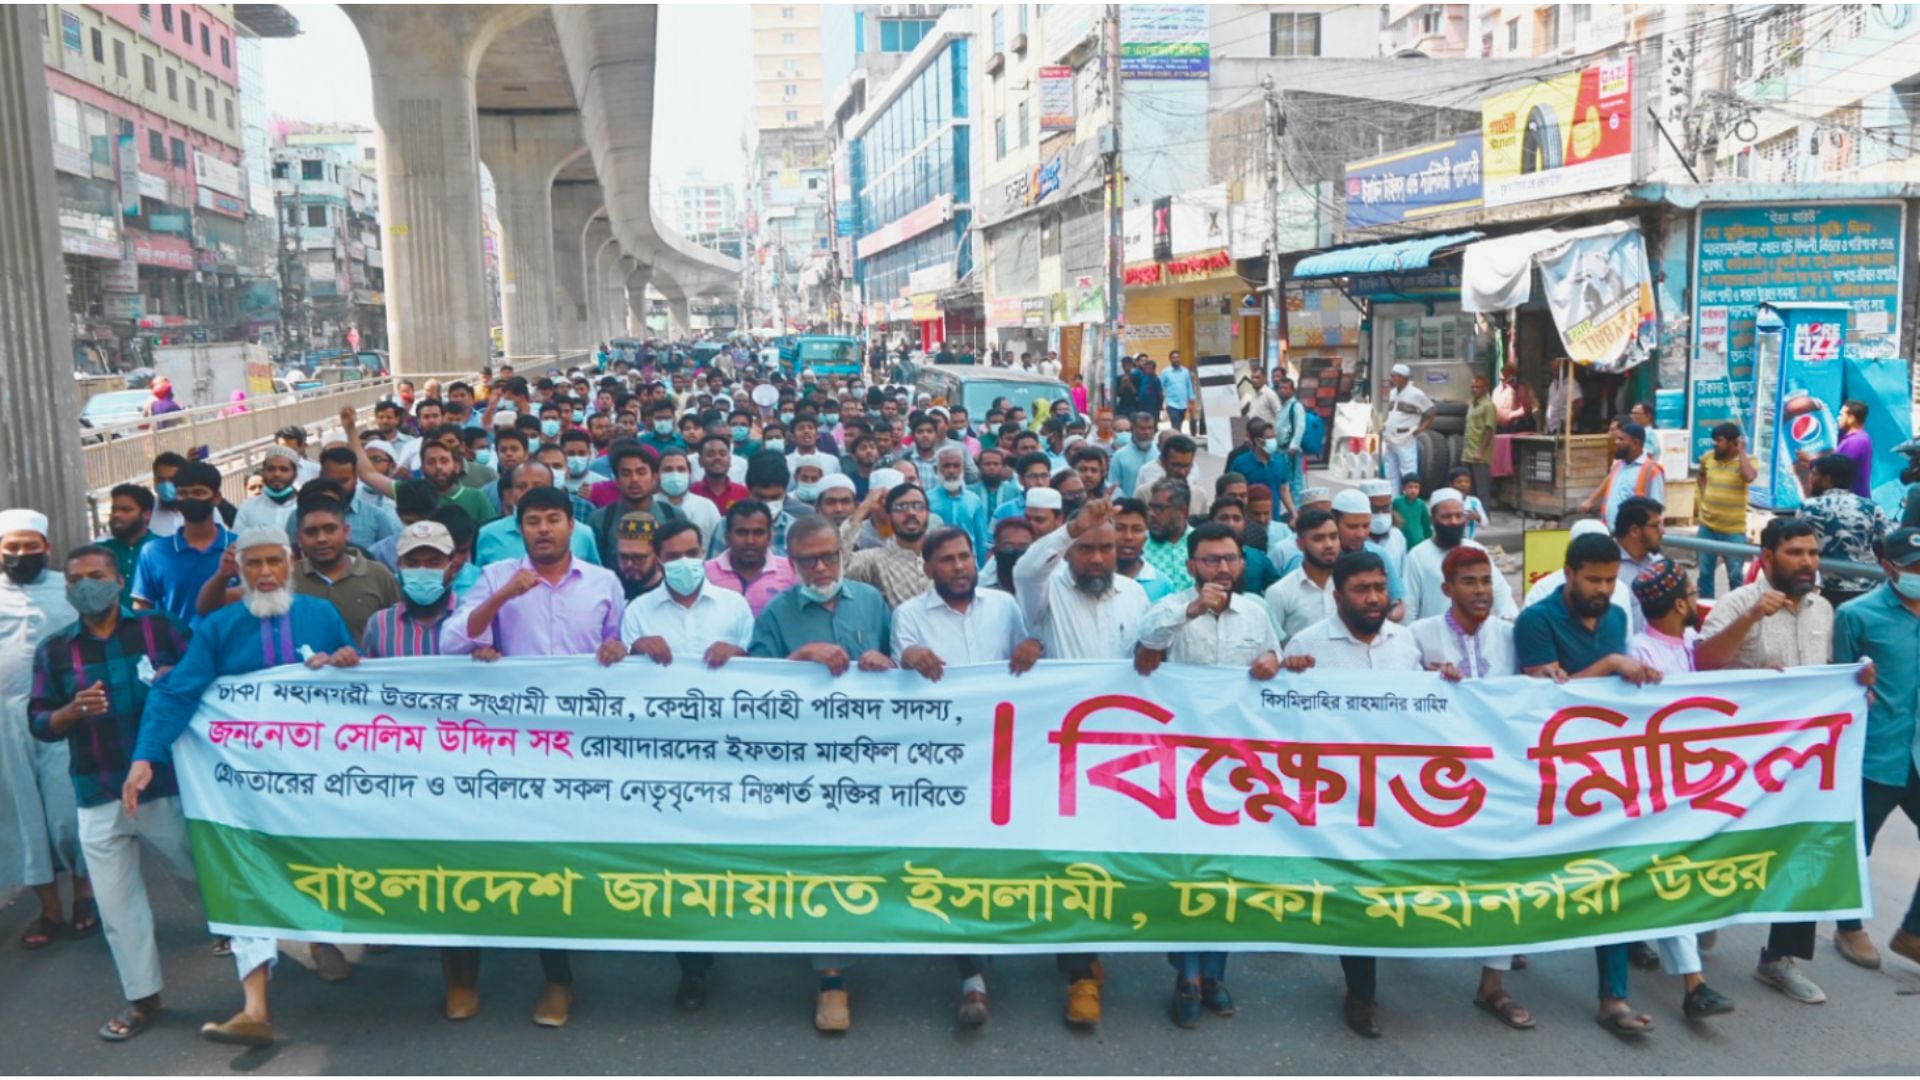 <div class="paragraphs"><p>A&nbsp;Jamaat-e-Islami procession. Image used for representation only.&nbsp;</p></div>